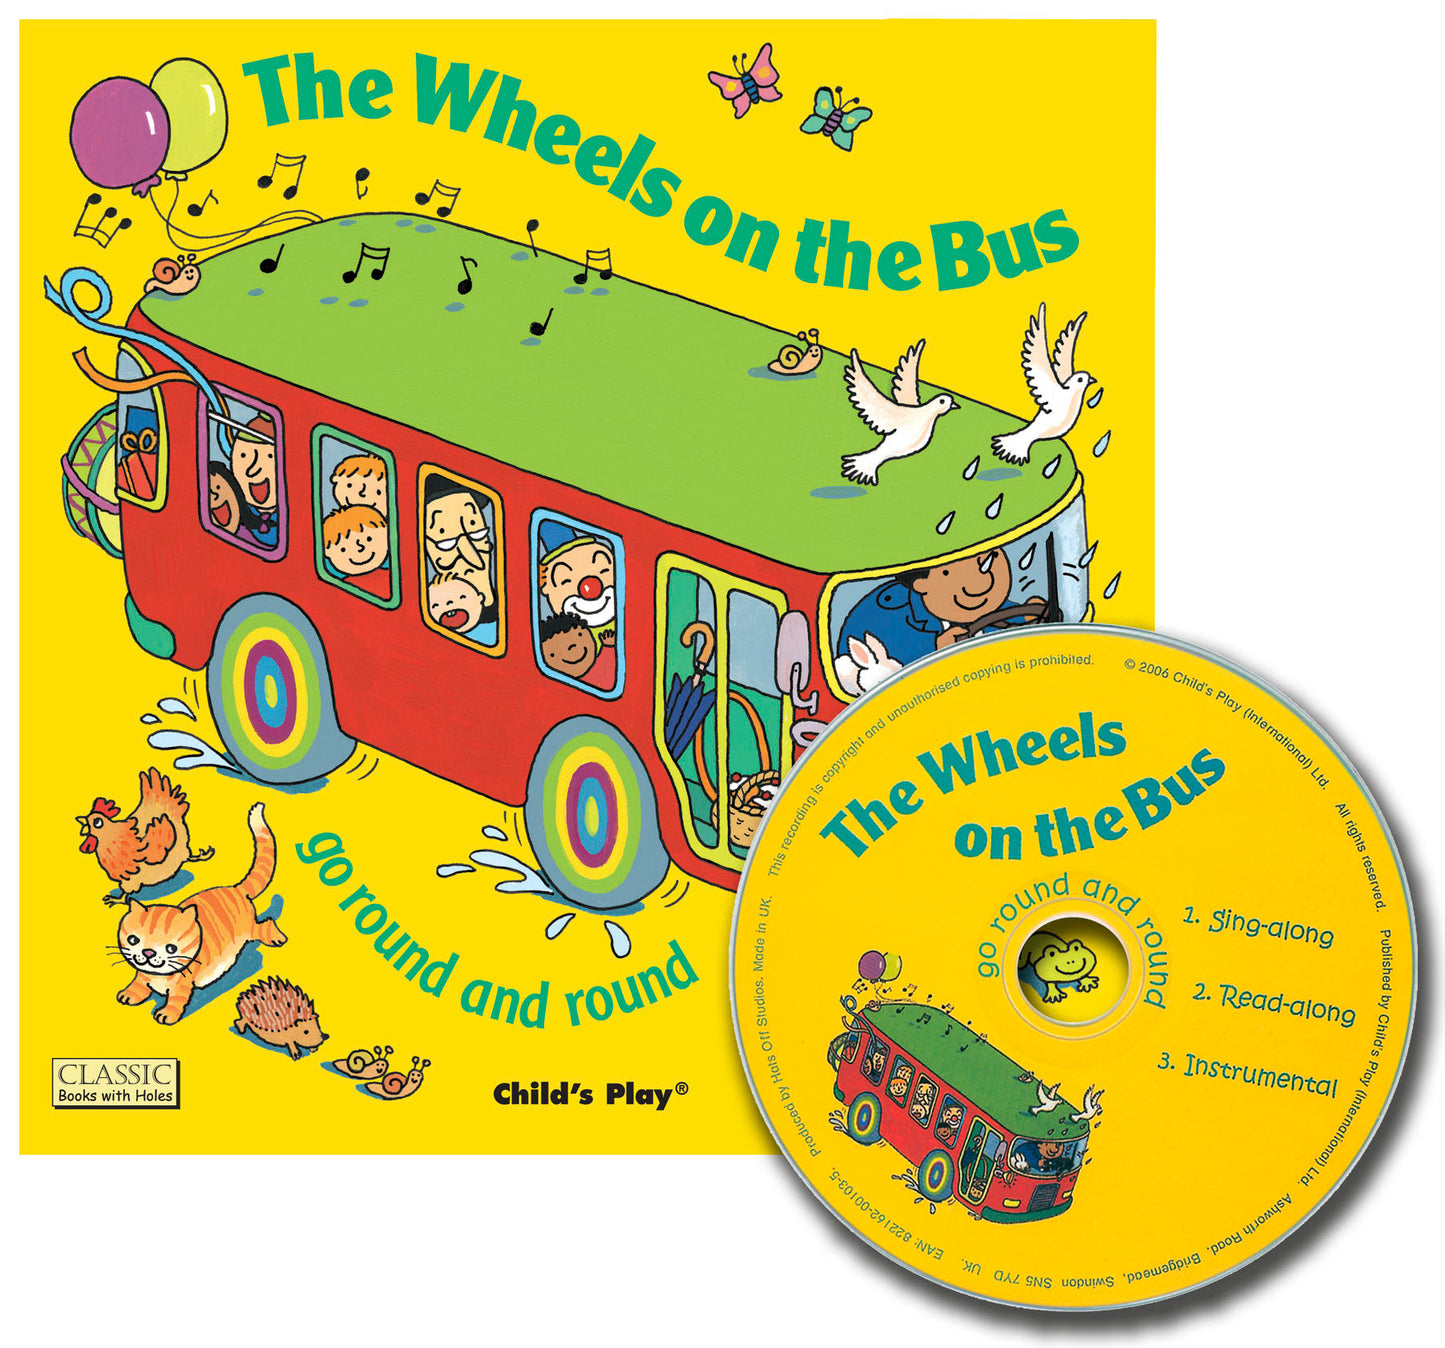 The Wheels on the Bus go Round and Round (8x8 Softcover with CD Edition)